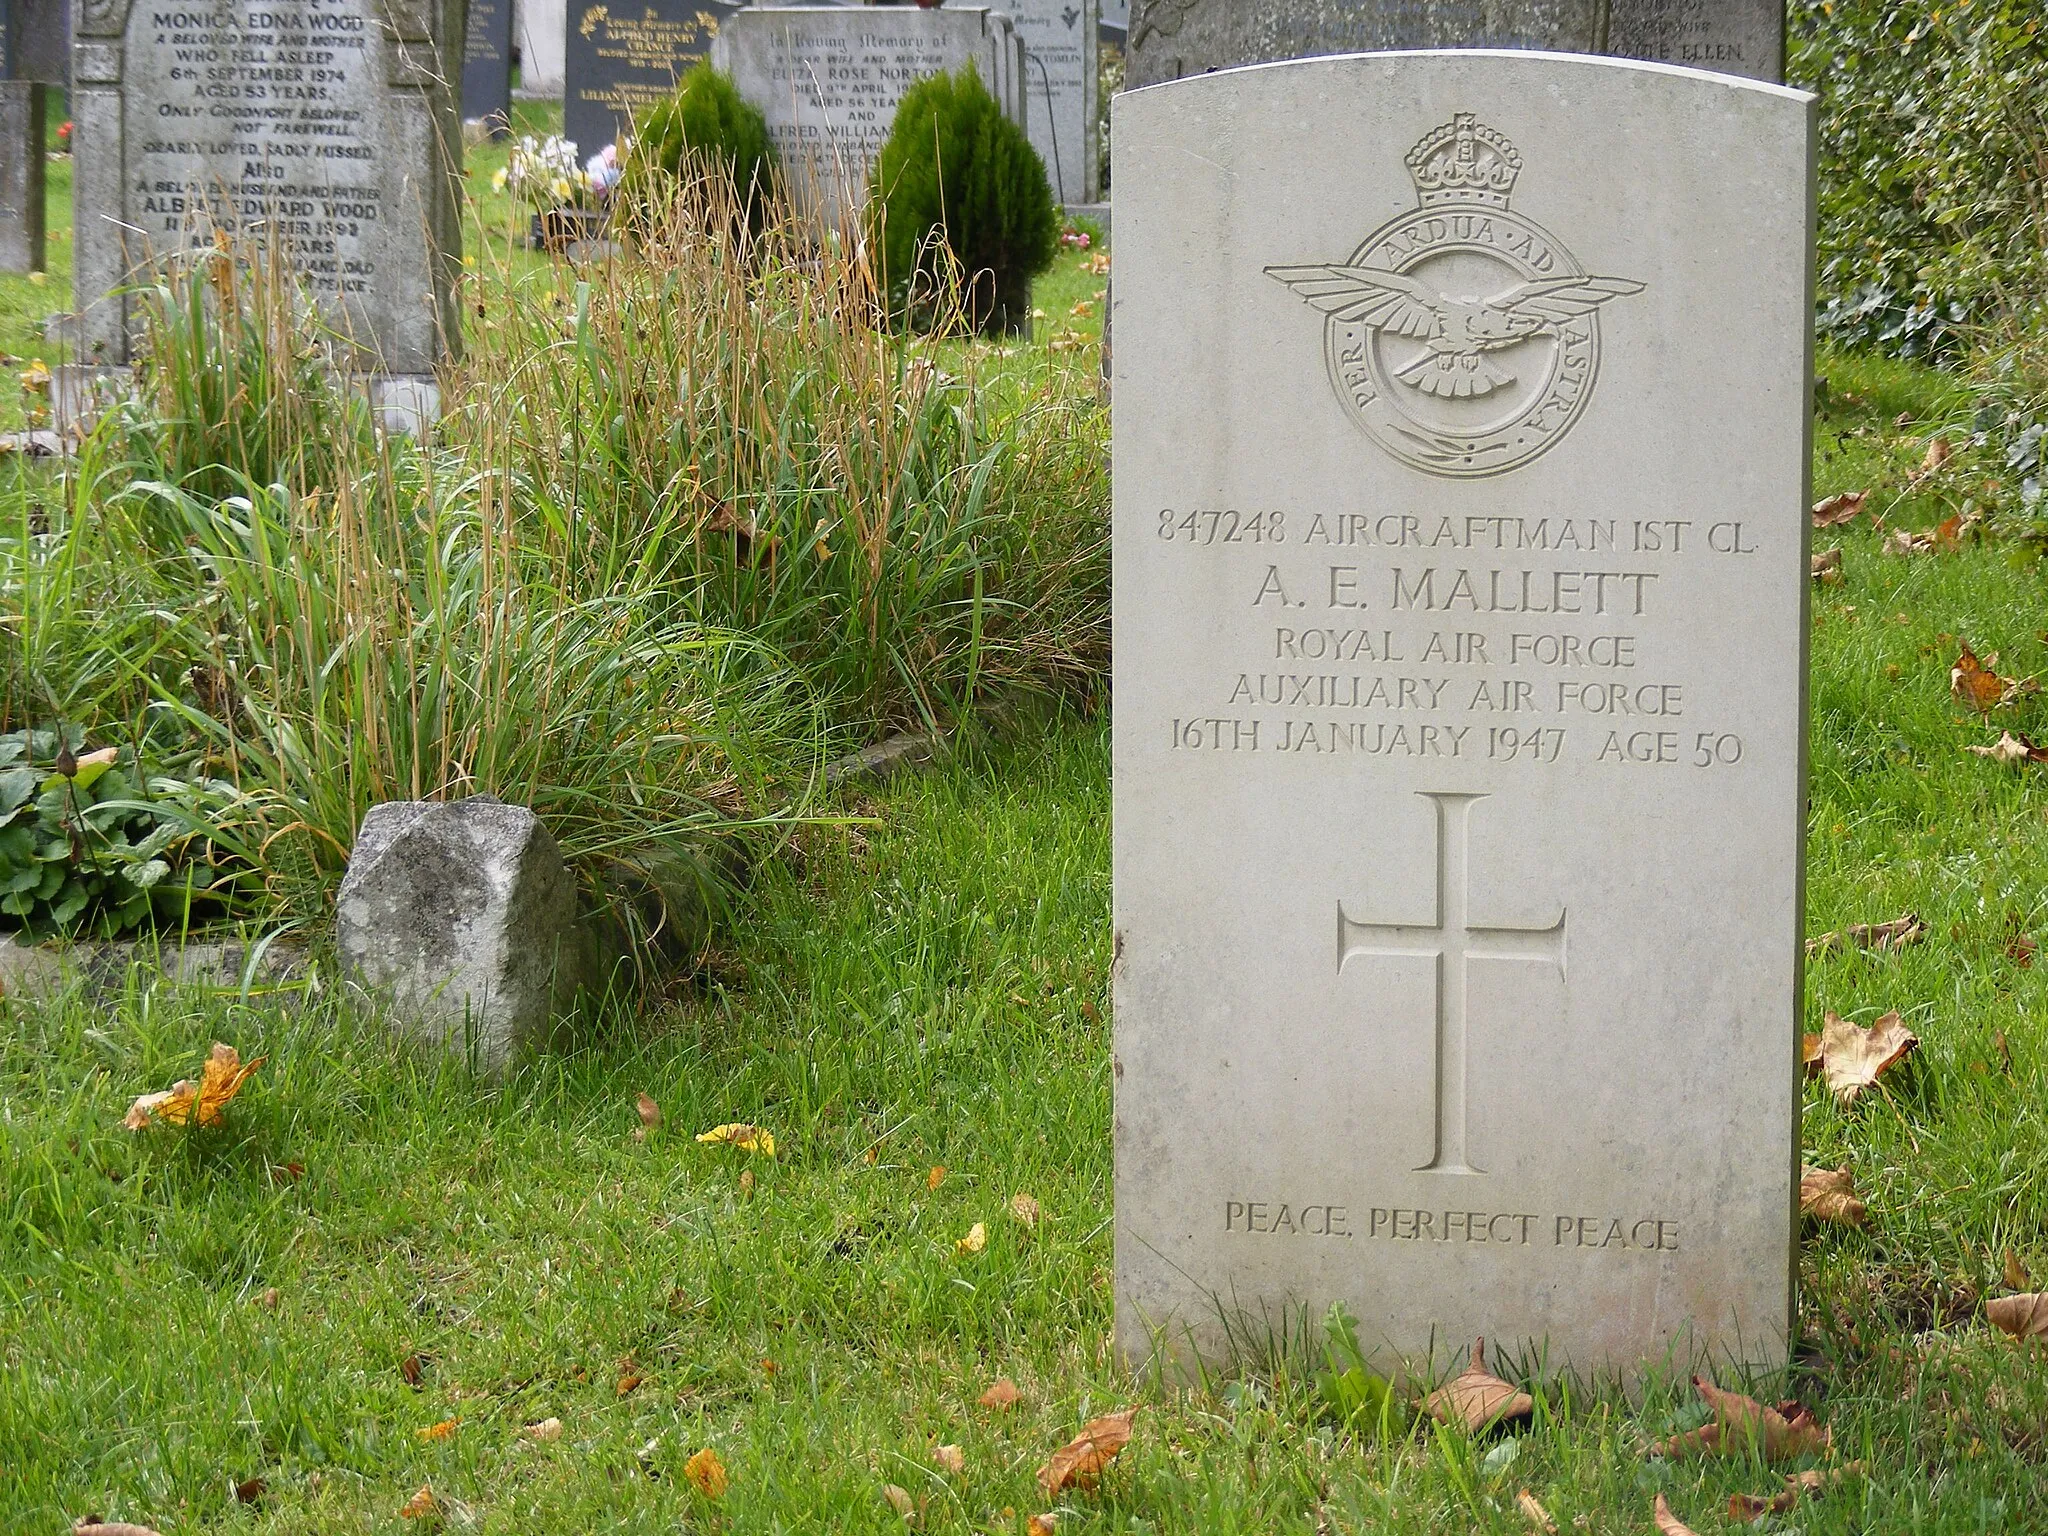 Photo showing: War Gravestone, Havering-atte-Bower   Aircraftman A.E. Mallett   RAF auxiliary Air Force  16th January 1947 age 50  
which is some time after the war ended, and the death was registered locally.  Arthur Edward Mallett of 8 Victoria Avenue Romford husband of Elizabeth Mary Mallett